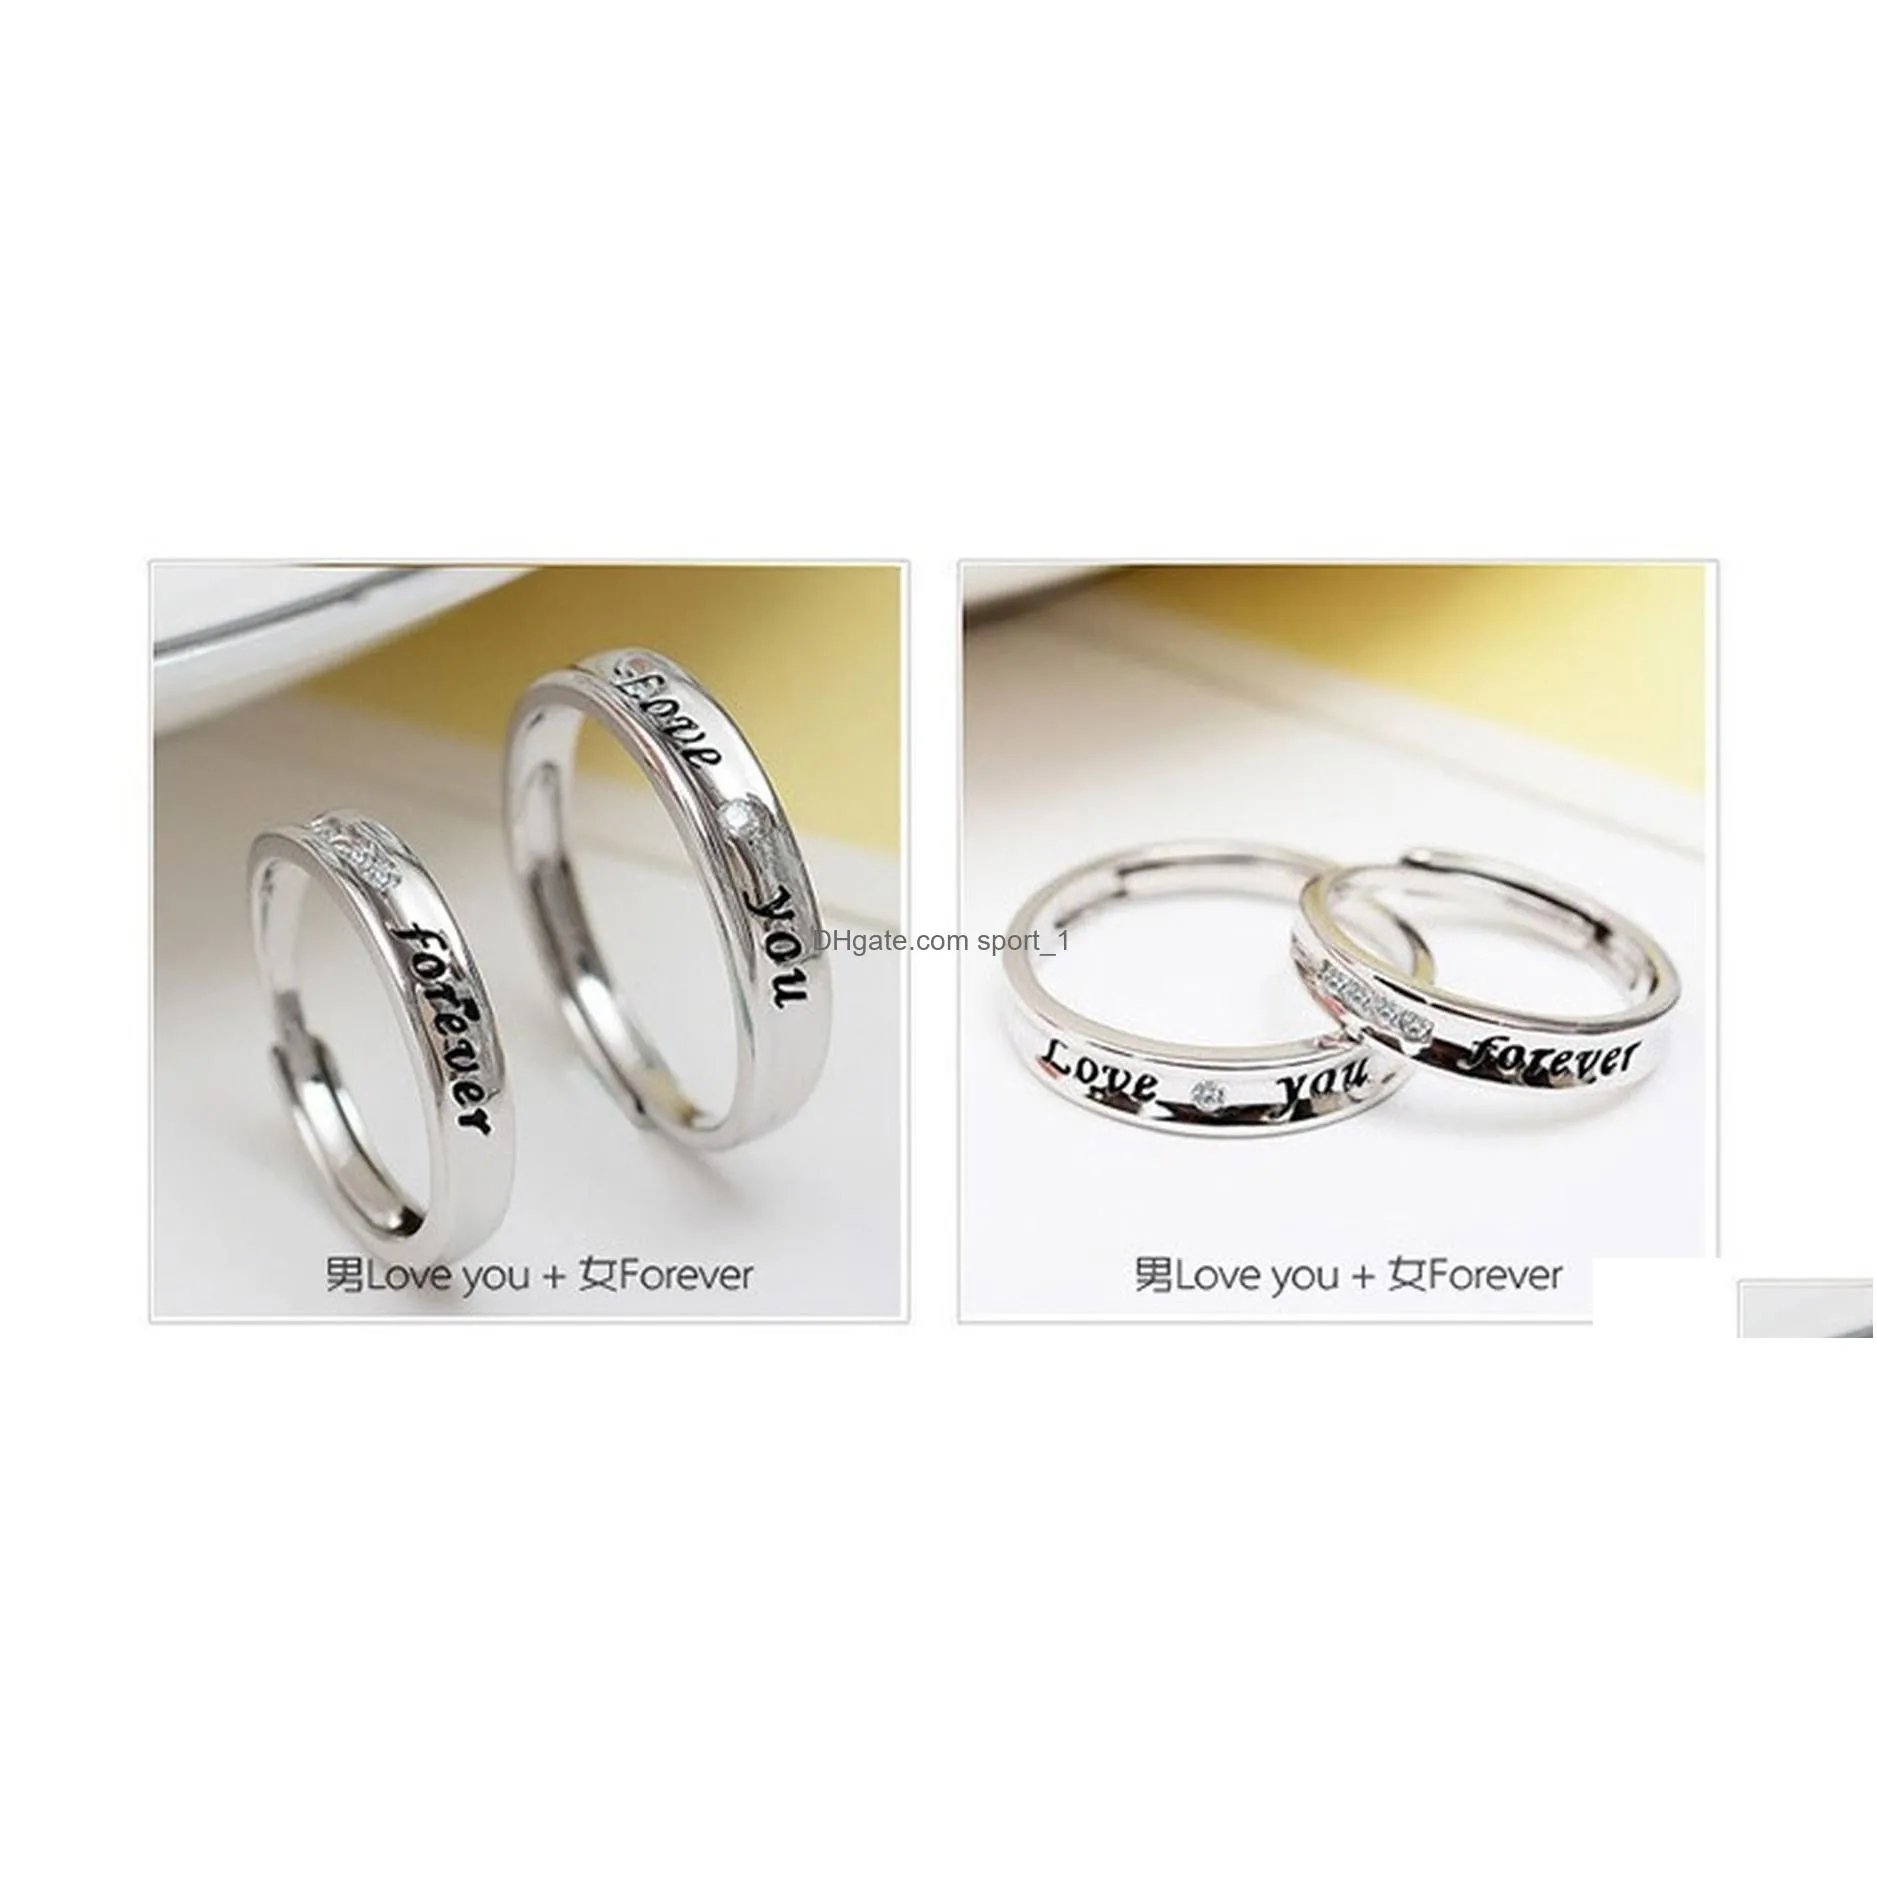 couple love you forever band rings crystal diamond engagement wedding ring for women men fashion jewelry gift will and sandy